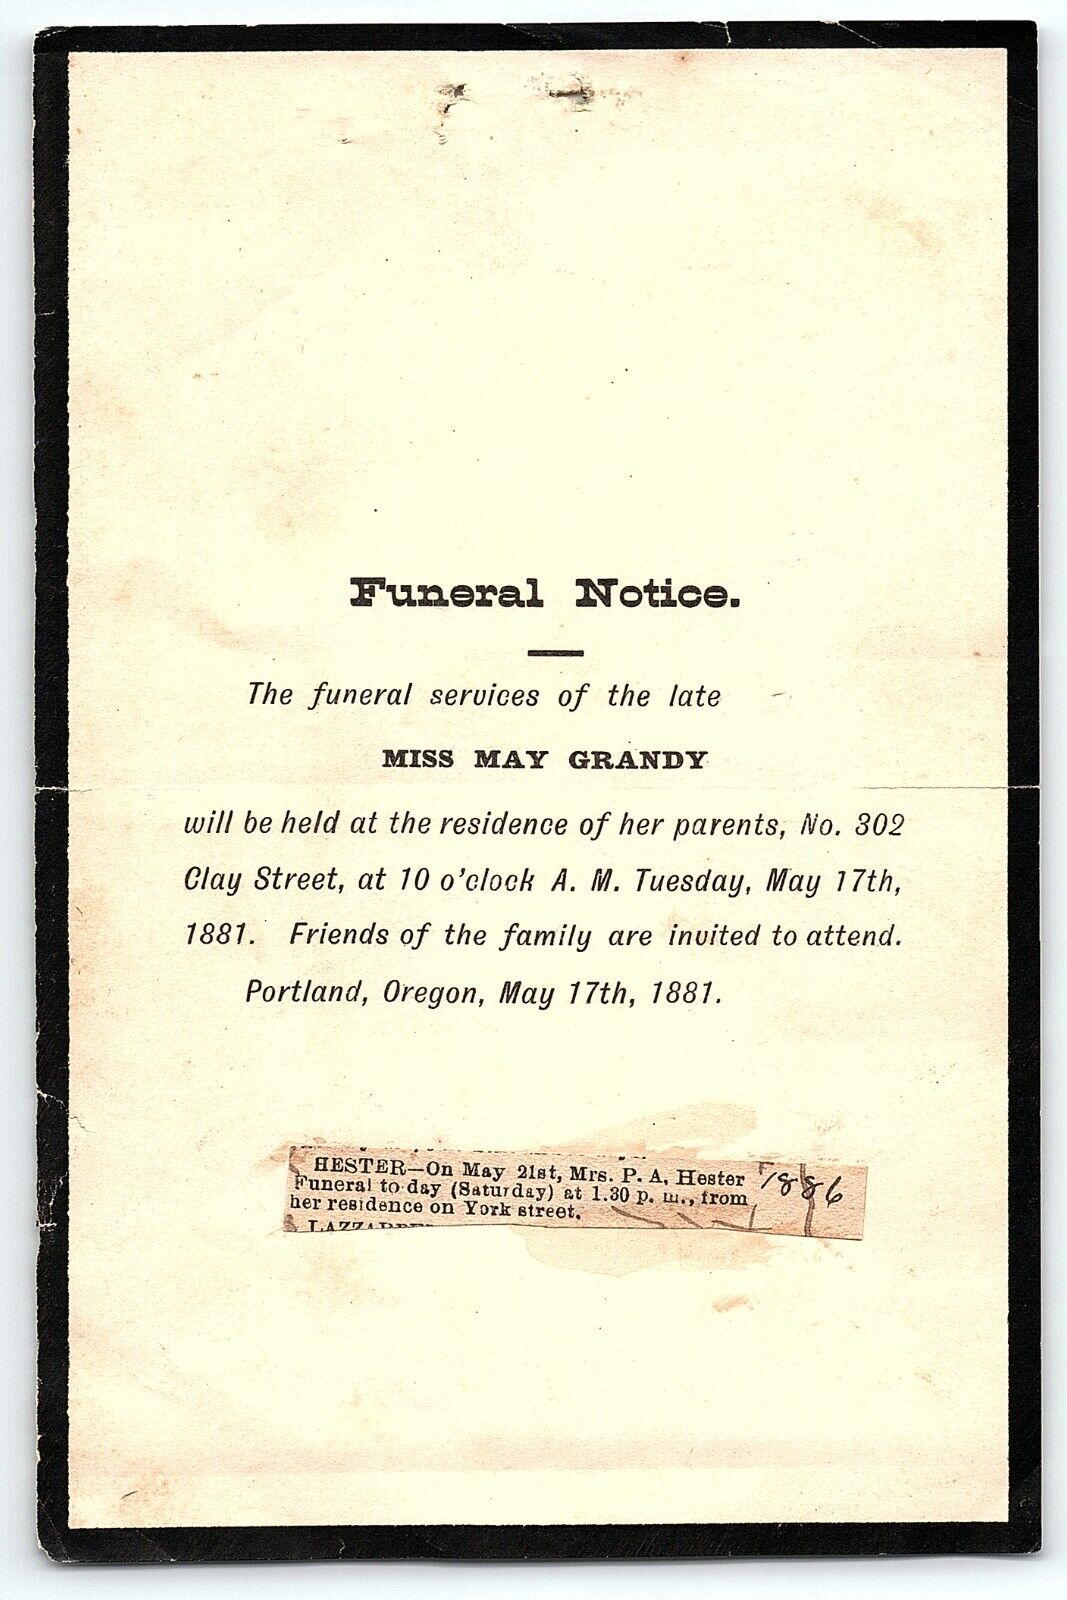 1881 PORTLAND OREGON FUNERAL NOTICE MISS MAY GRANDY AT PARENTS RESIDENCE Z5220